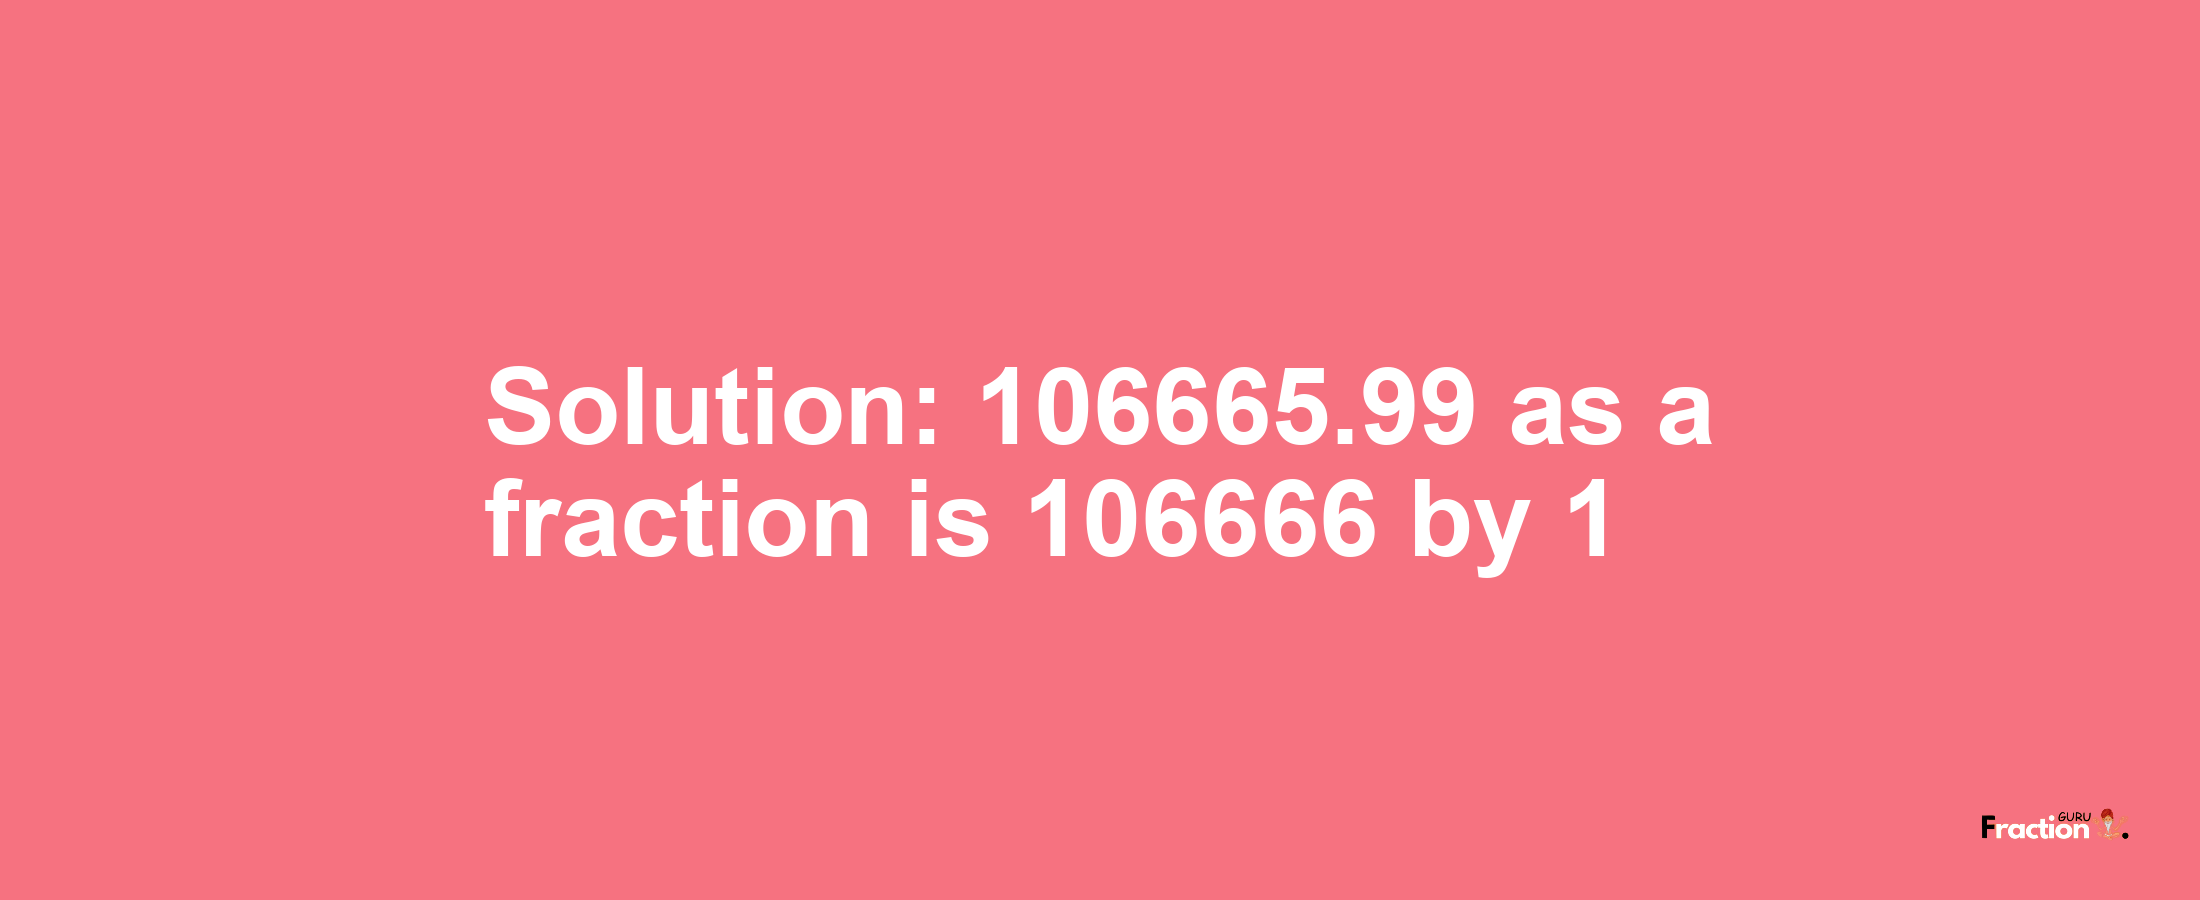 Solution:106665.99 as a fraction is 106666/1